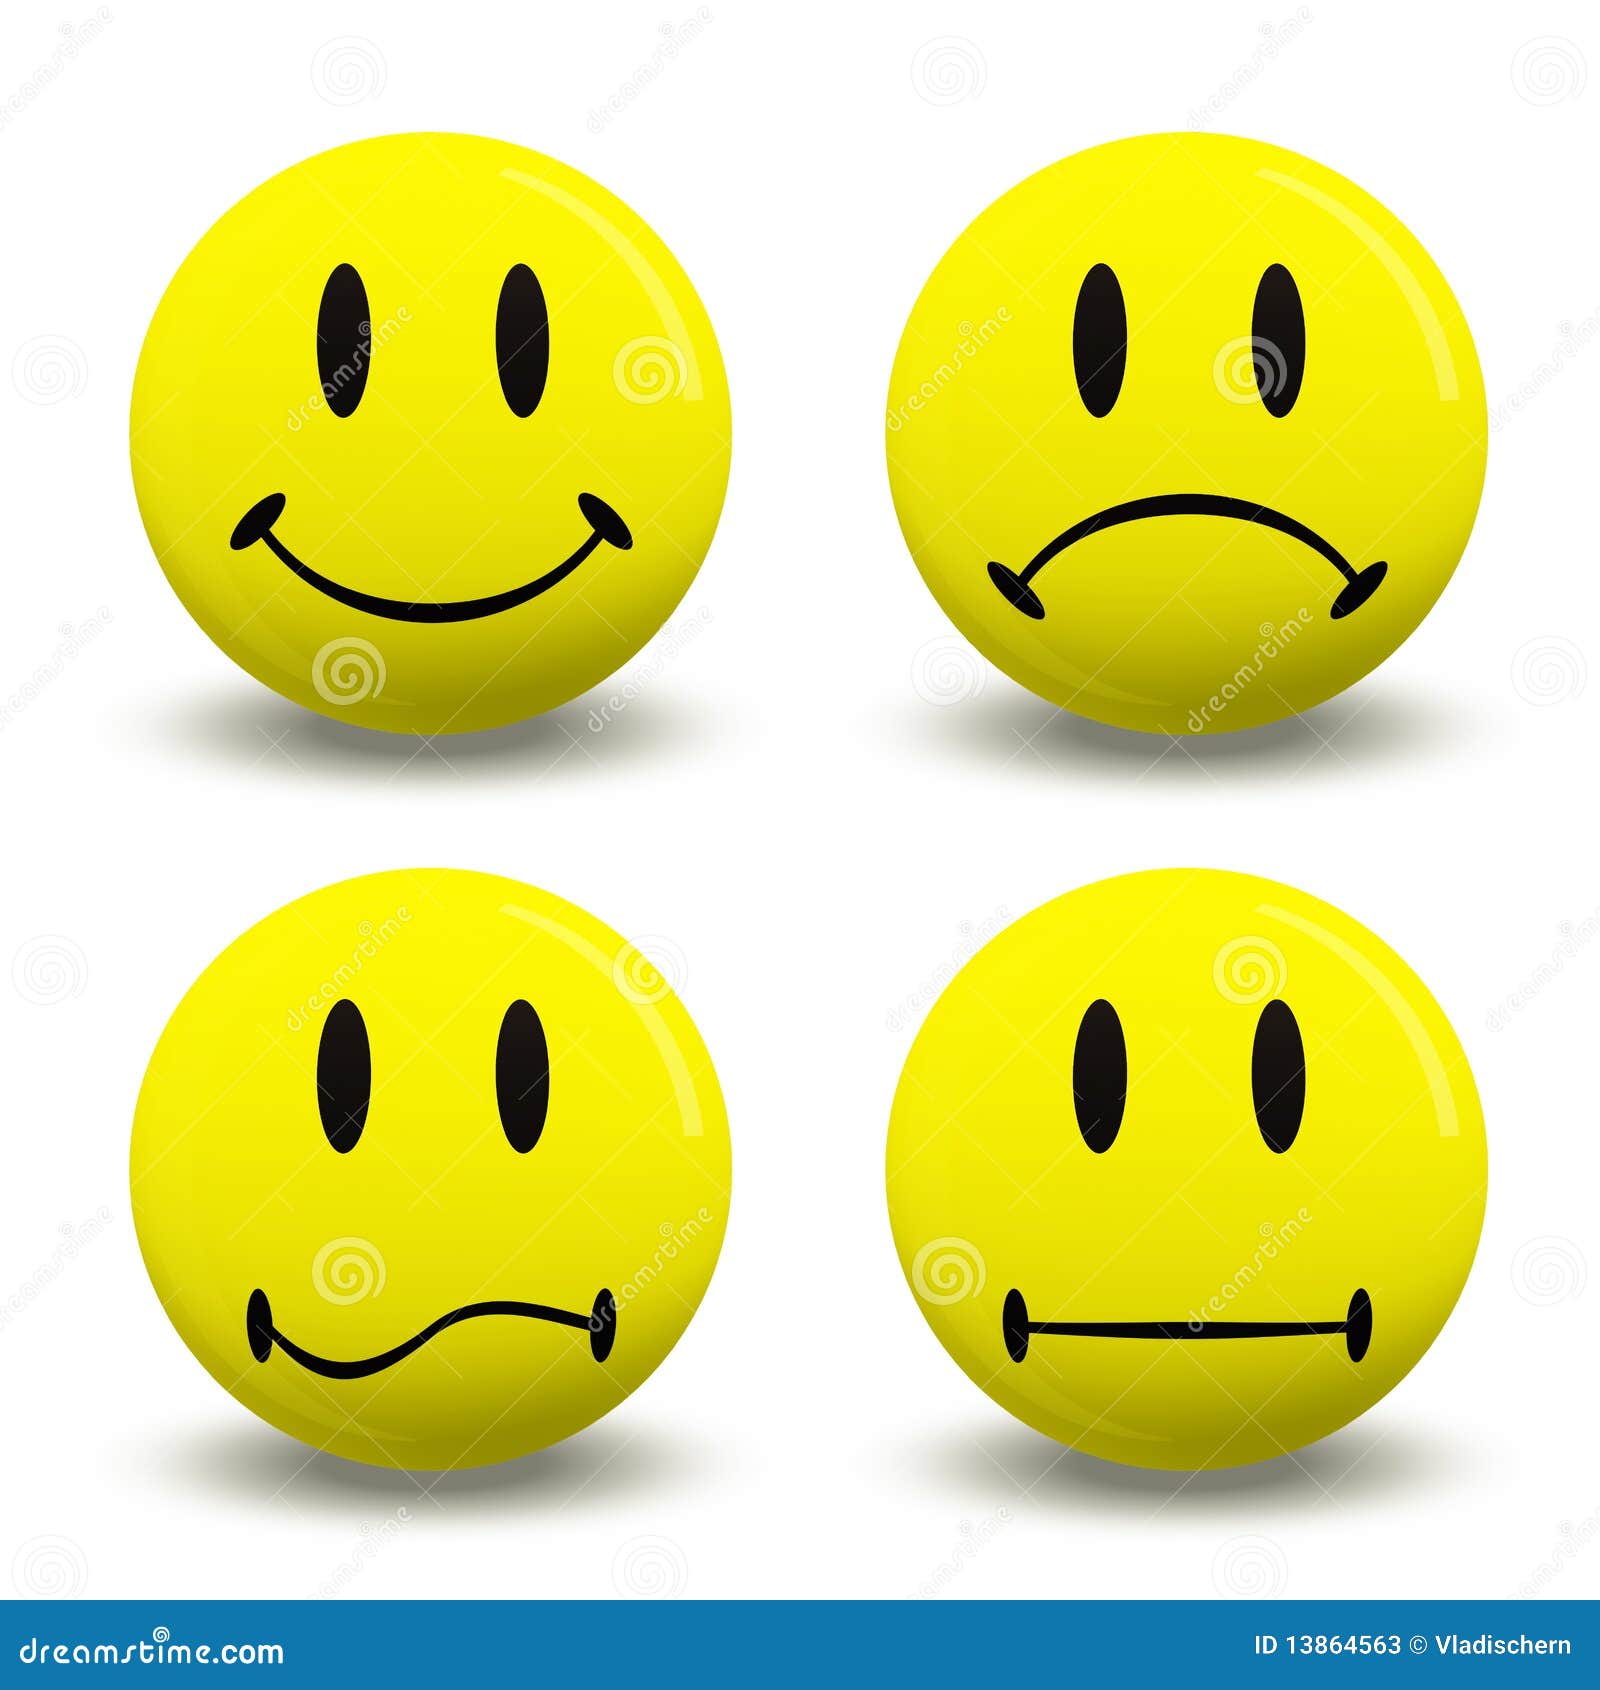 clipart of facial emotions - photo #23